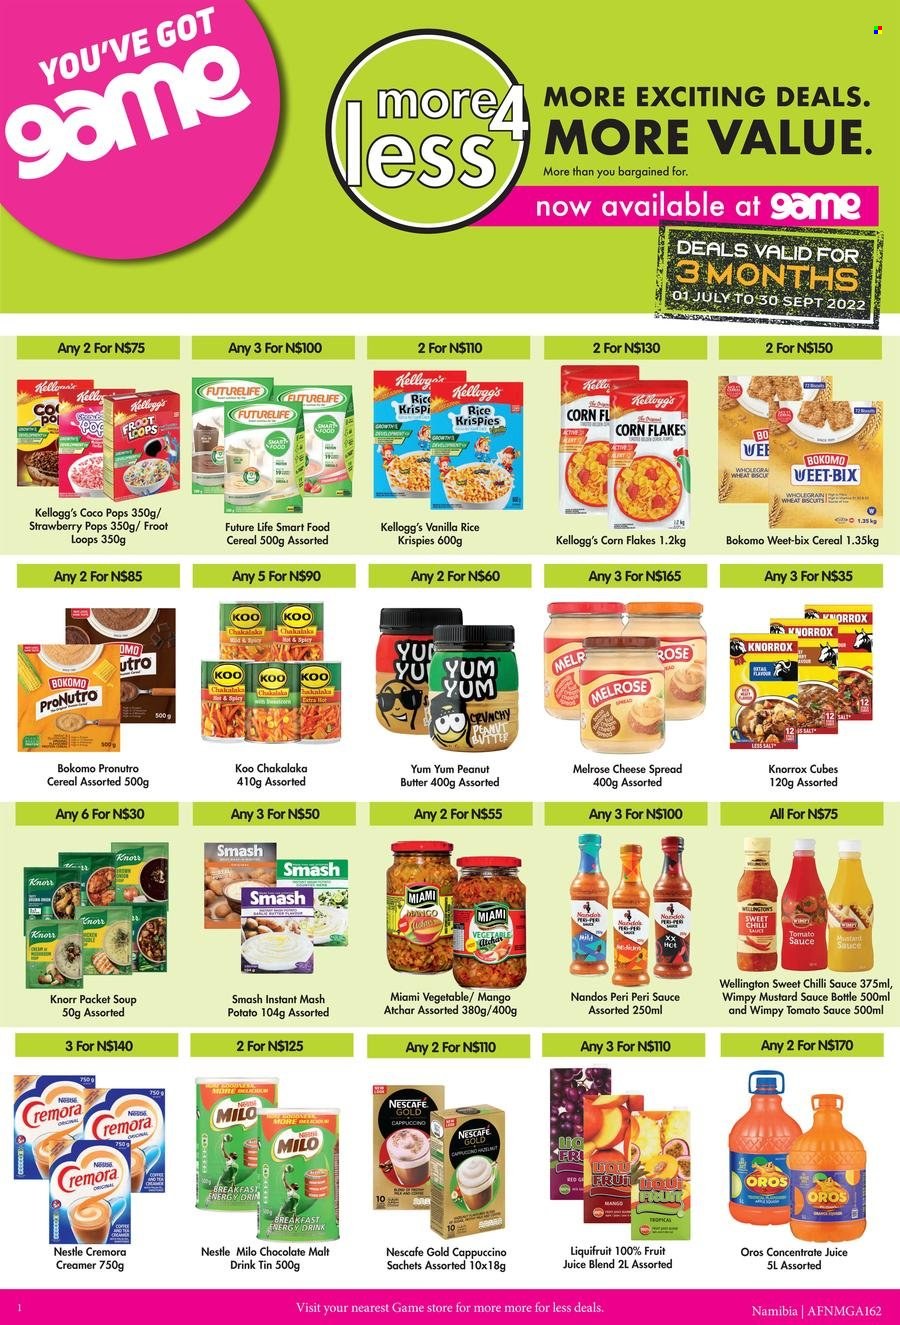 thumbnail - Game catalogue  - 01/07/2022 - 30/09/2022 - Sales products - soup, Knorr, sauce, chakalaka, cheese spread, Melrose, Milo, creamer, Nestlé, chocolate, cereal bar, Kellogg's, biscuit, Cremora, Knorrox, tomato sauce, Koo, cereals, corn flakes, coco pops, Weet-Bix, ProNutro, Rice Krispies, mustard, chilli sauce, mustard sauce, sweet chilli sauce, peri peri sauce, atchar, peanut butter, energy drink, fruit juice, juice, Oros, tea, cappuccino, Nescafé, rosé wine. Page 1.